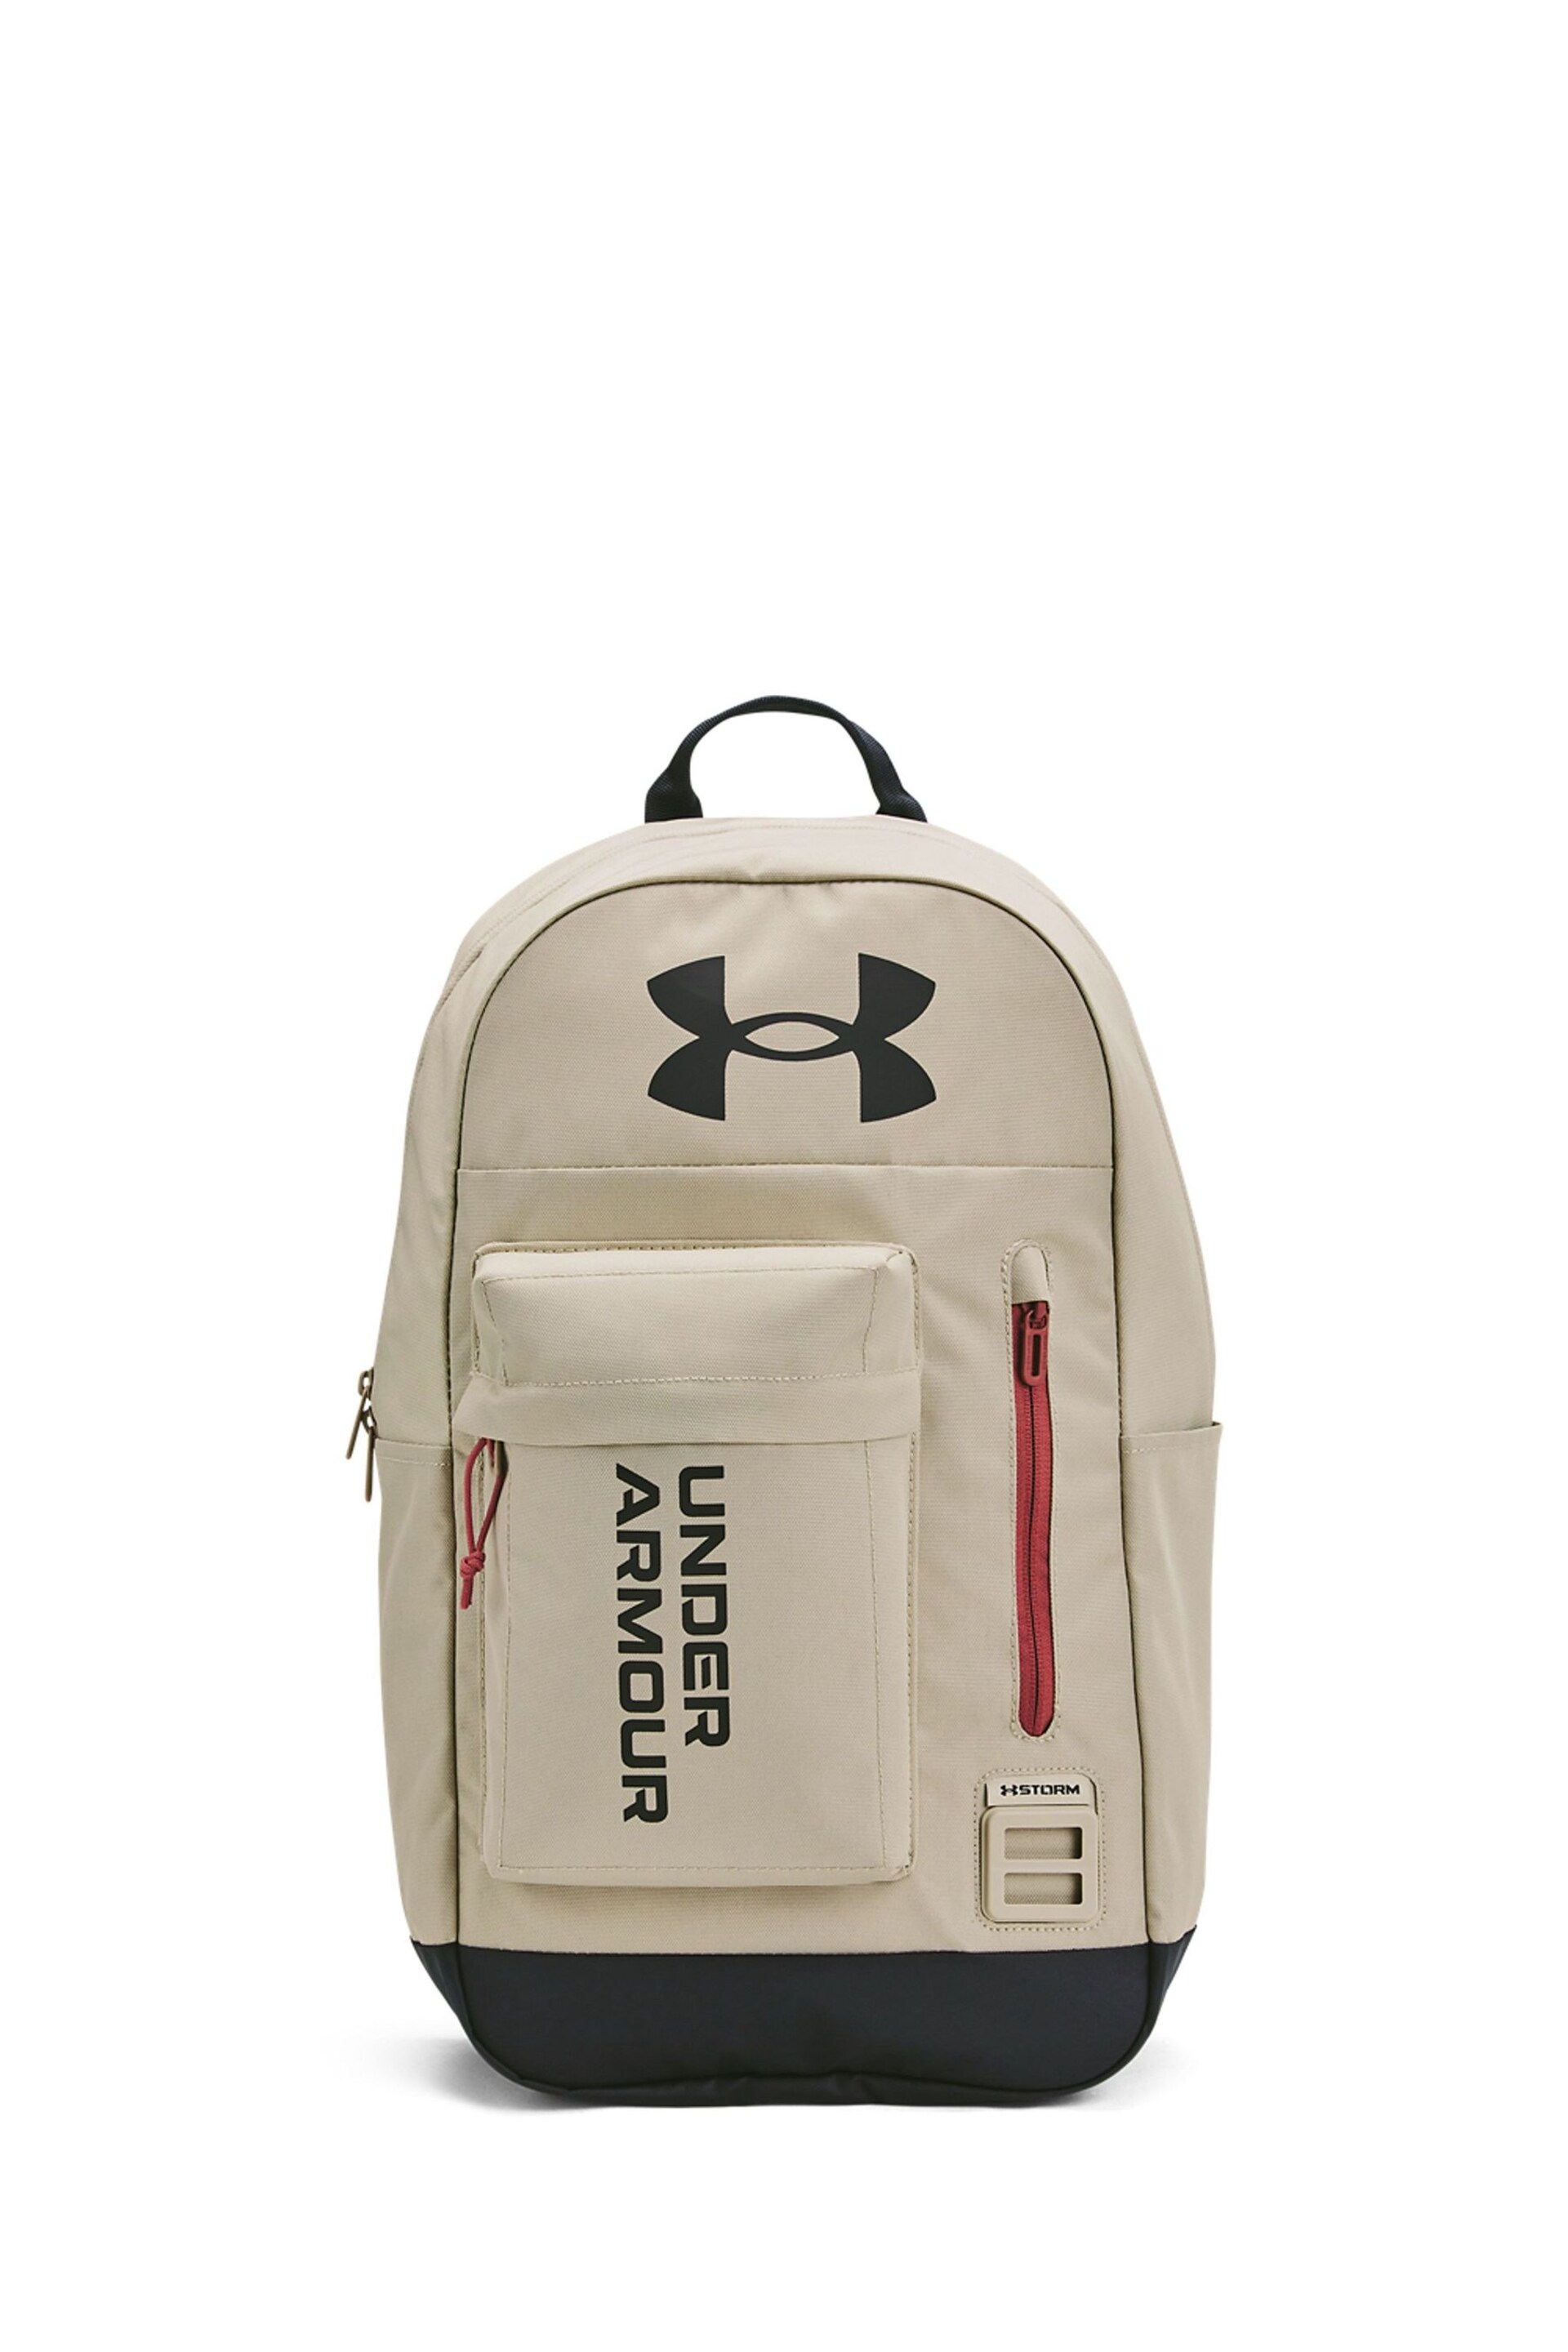 Under Armour Brown Halftime Backpack - Image 1 of 5